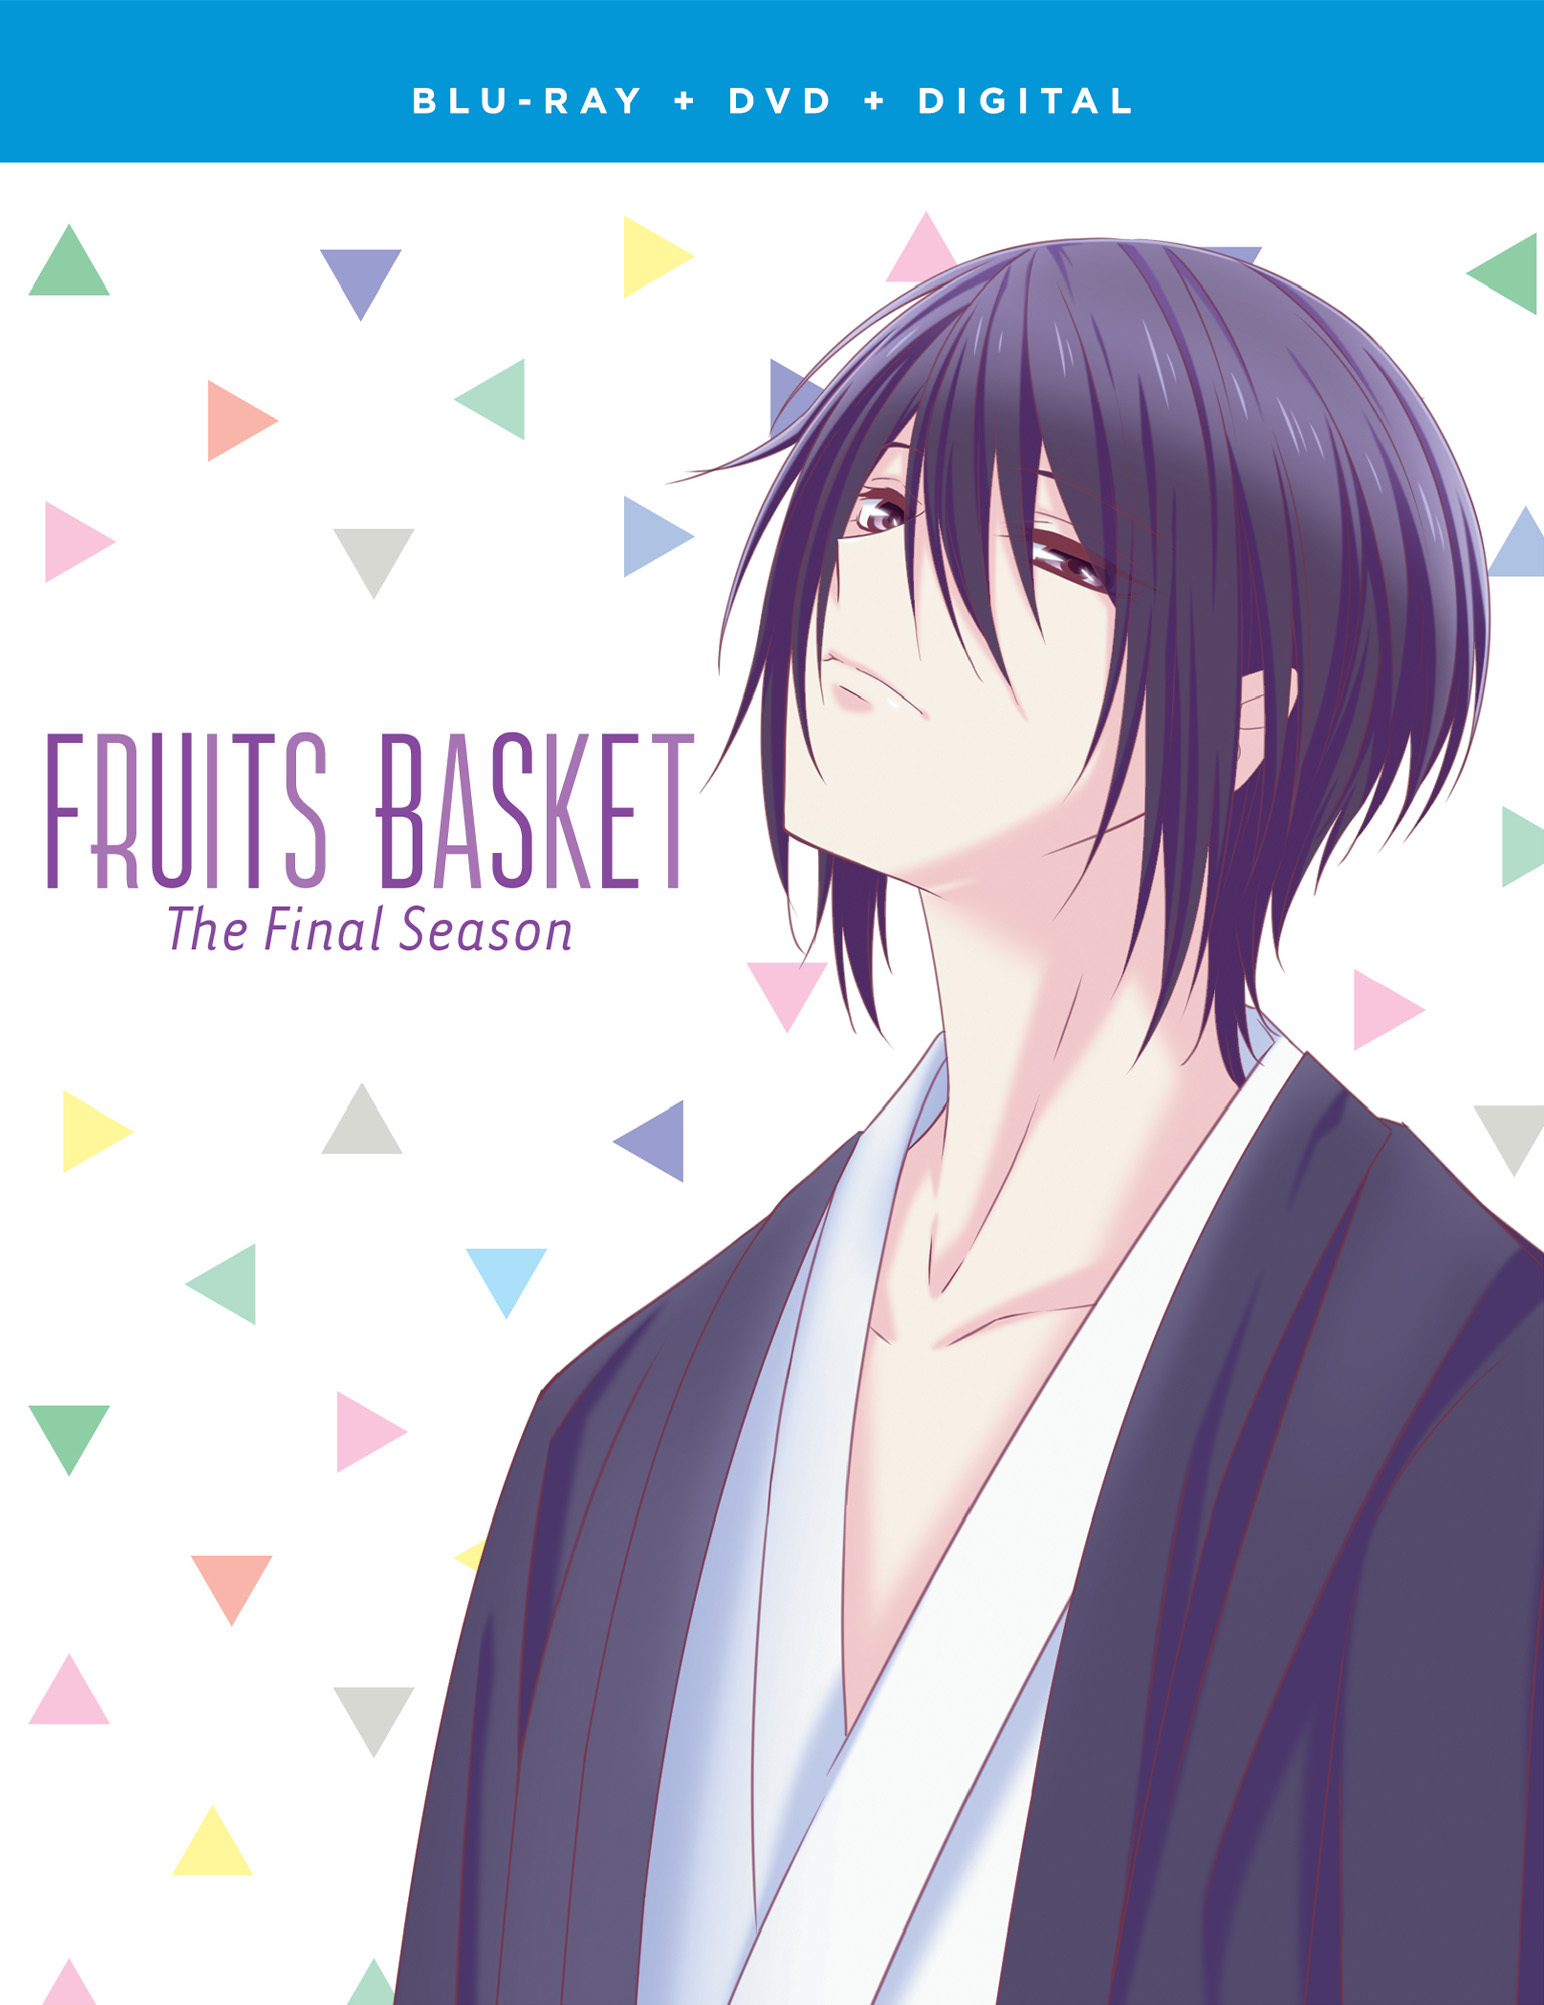 Fruits Basket: Prelude - The Movie - Blu-ray + DVD